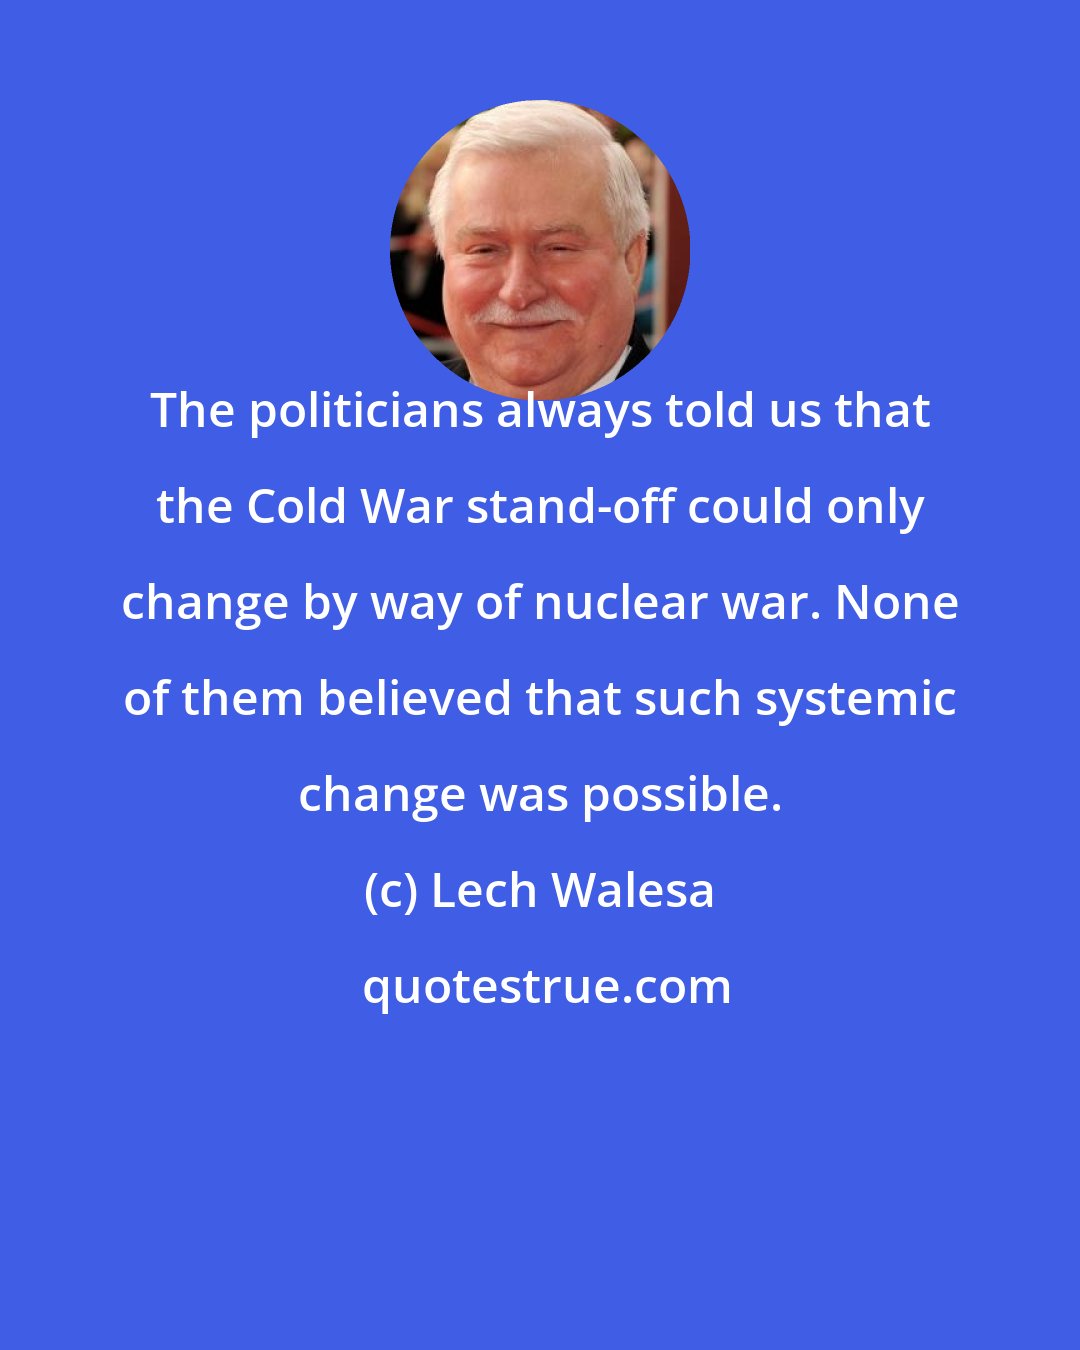 Lech Walesa: The politicians always told us that the Cold War stand-off could only change by way of nuclear war. None of them believed that such systemic change was possible.